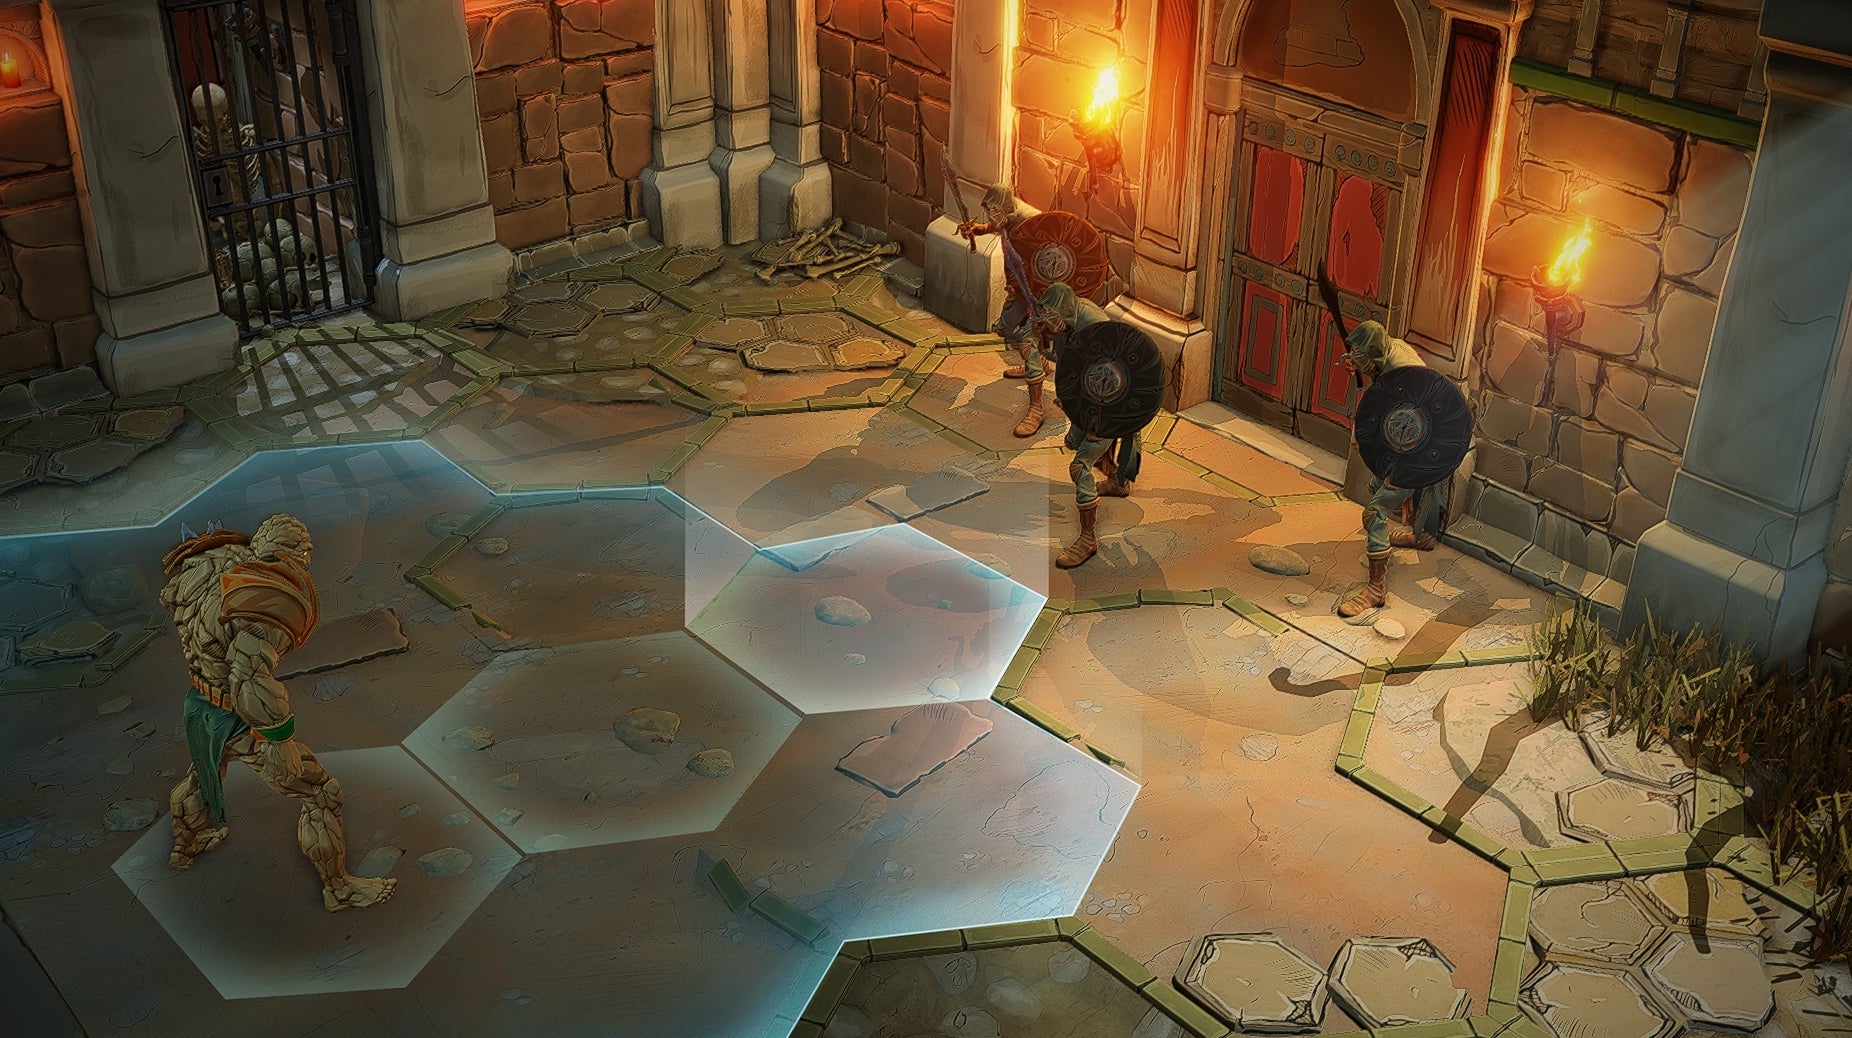 Image for Cult board game dungeon crawler Gloomhaven is getting a video game adaptation